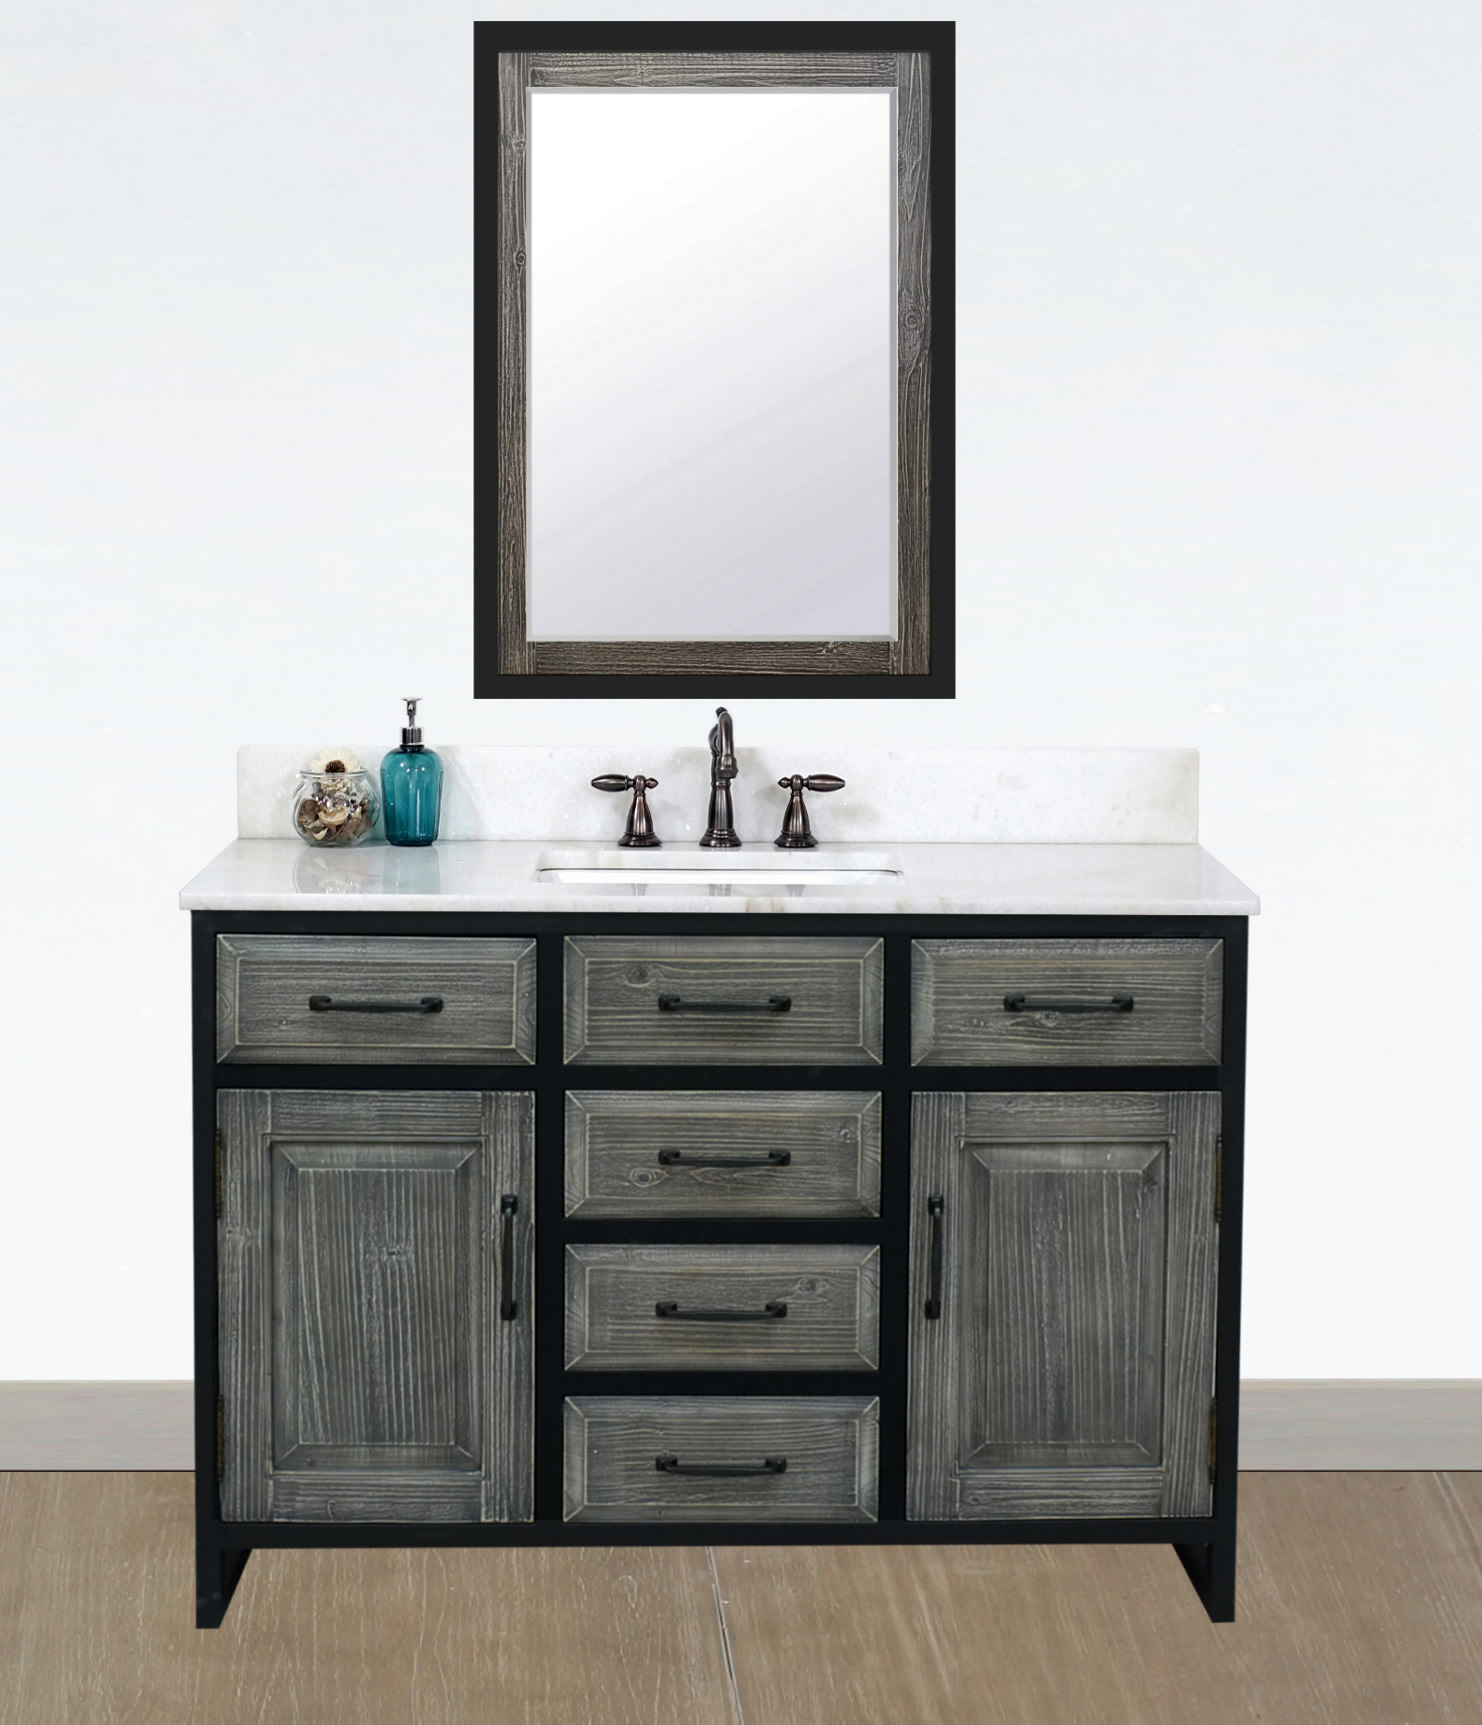 48" Rustic Solid Fir Single Sink with Iron Frame Vanity in Grey Driftwood - No Faucet with Countertop Options